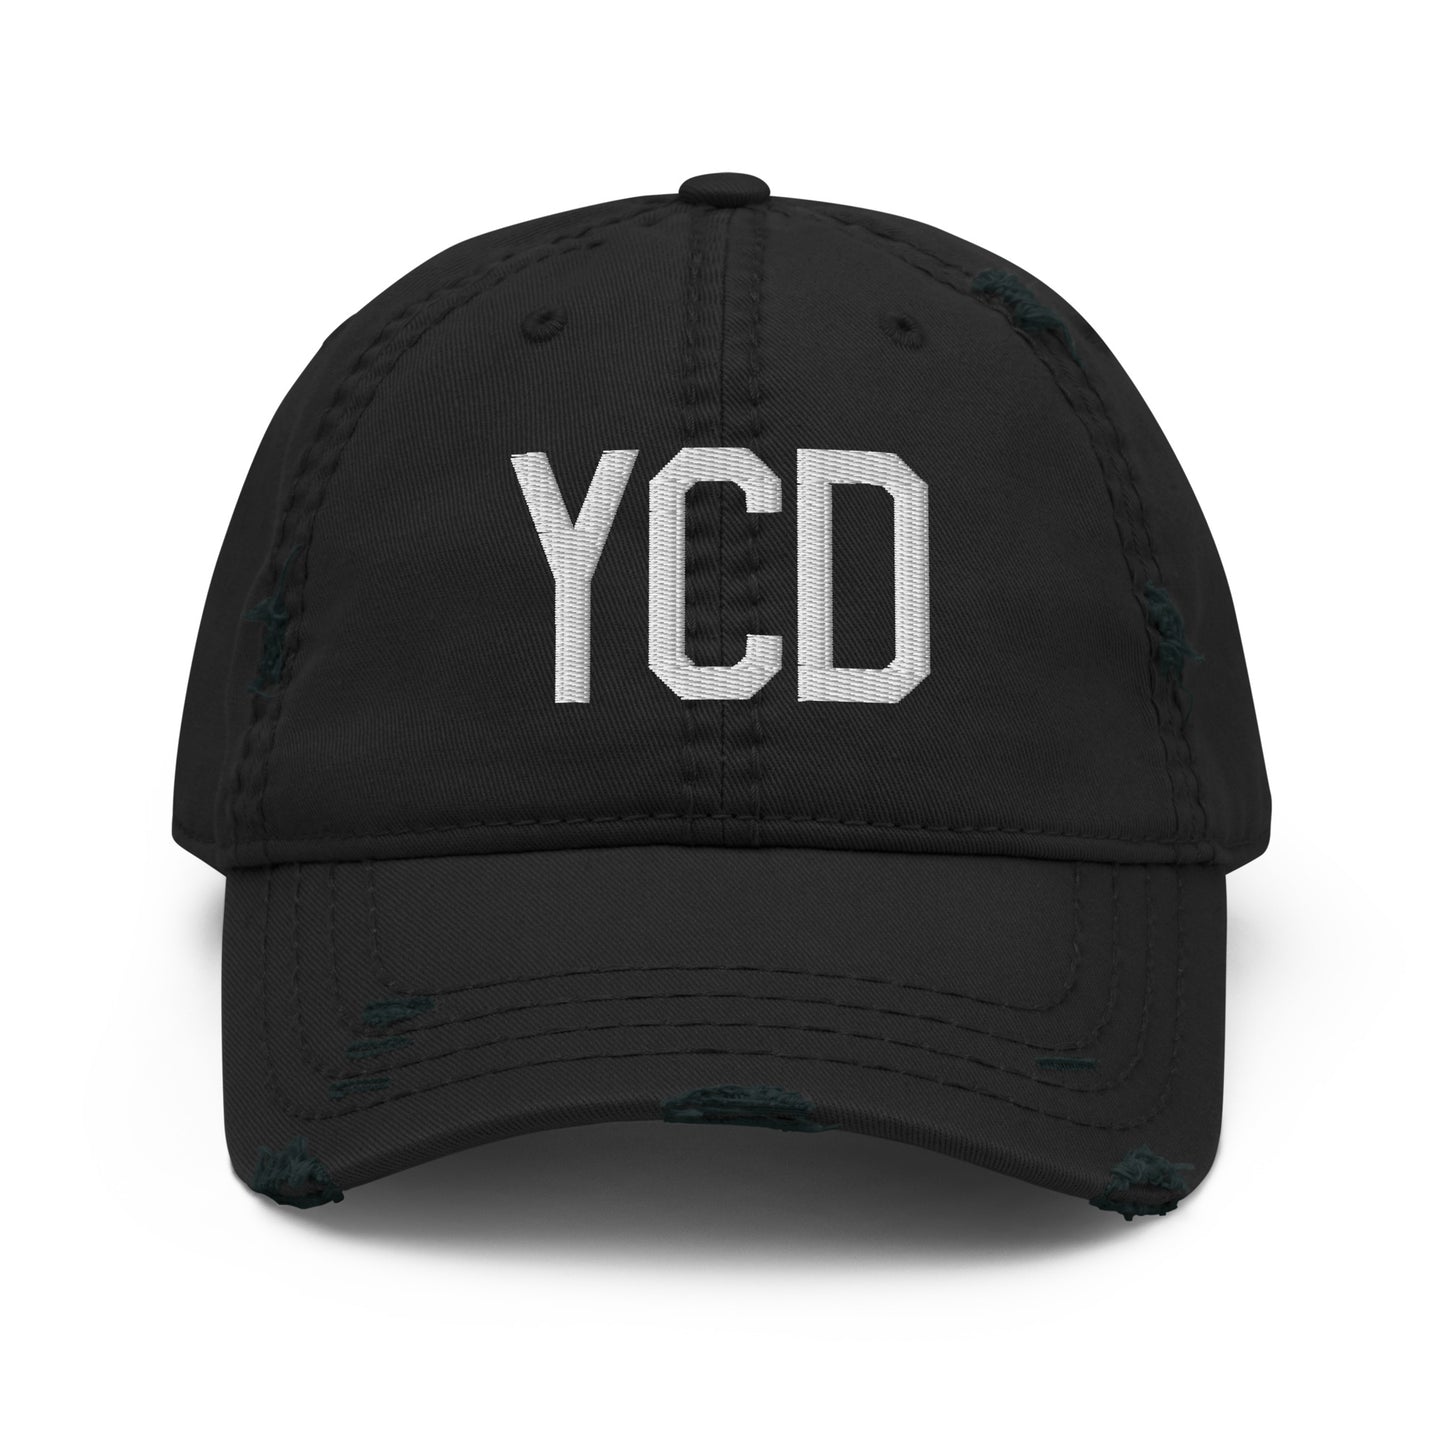 Airport Code Distressed Hat - White • YCD Nanaimo • YHM Designs - Image 10